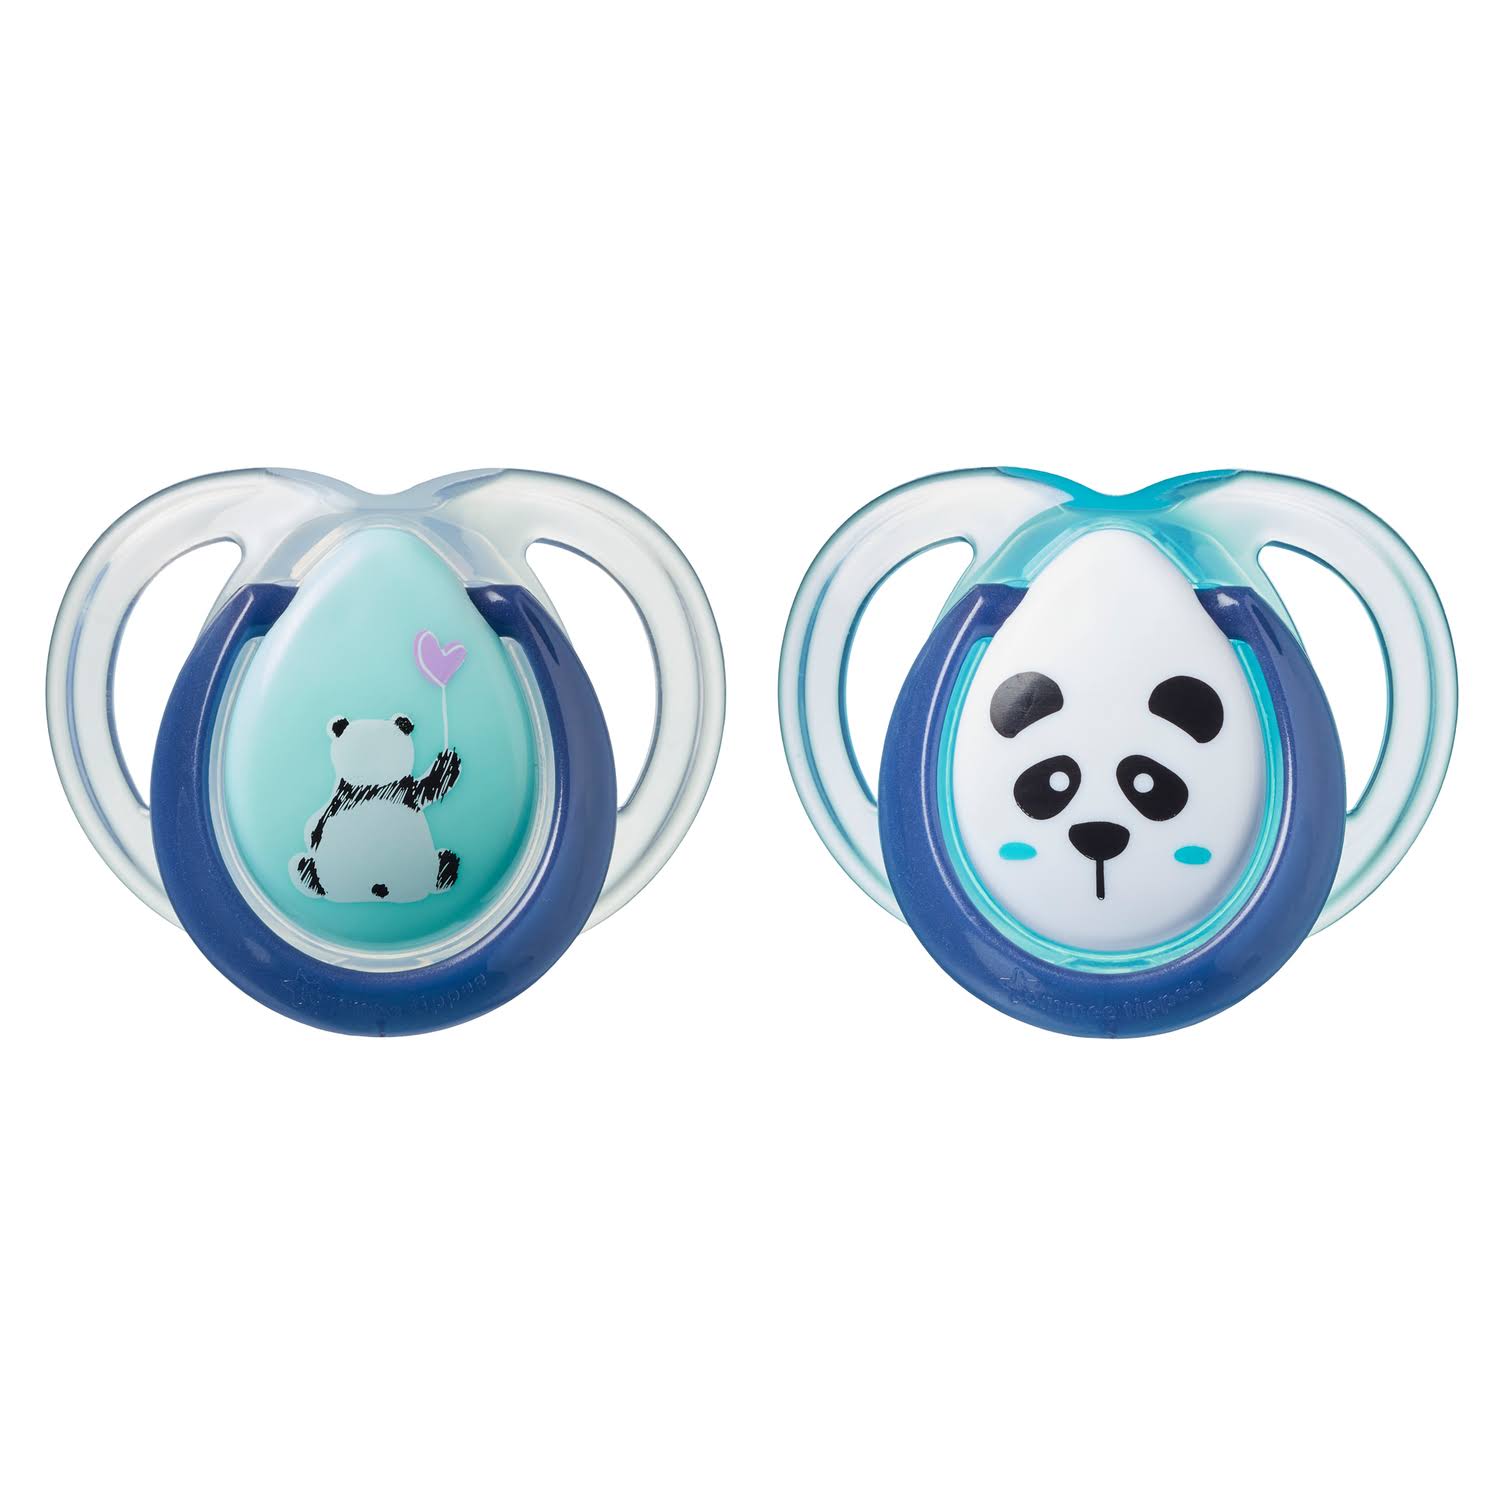 Tommee Tippee Anytime Orthodontic Soothers - 0-6 Months, 2pcs